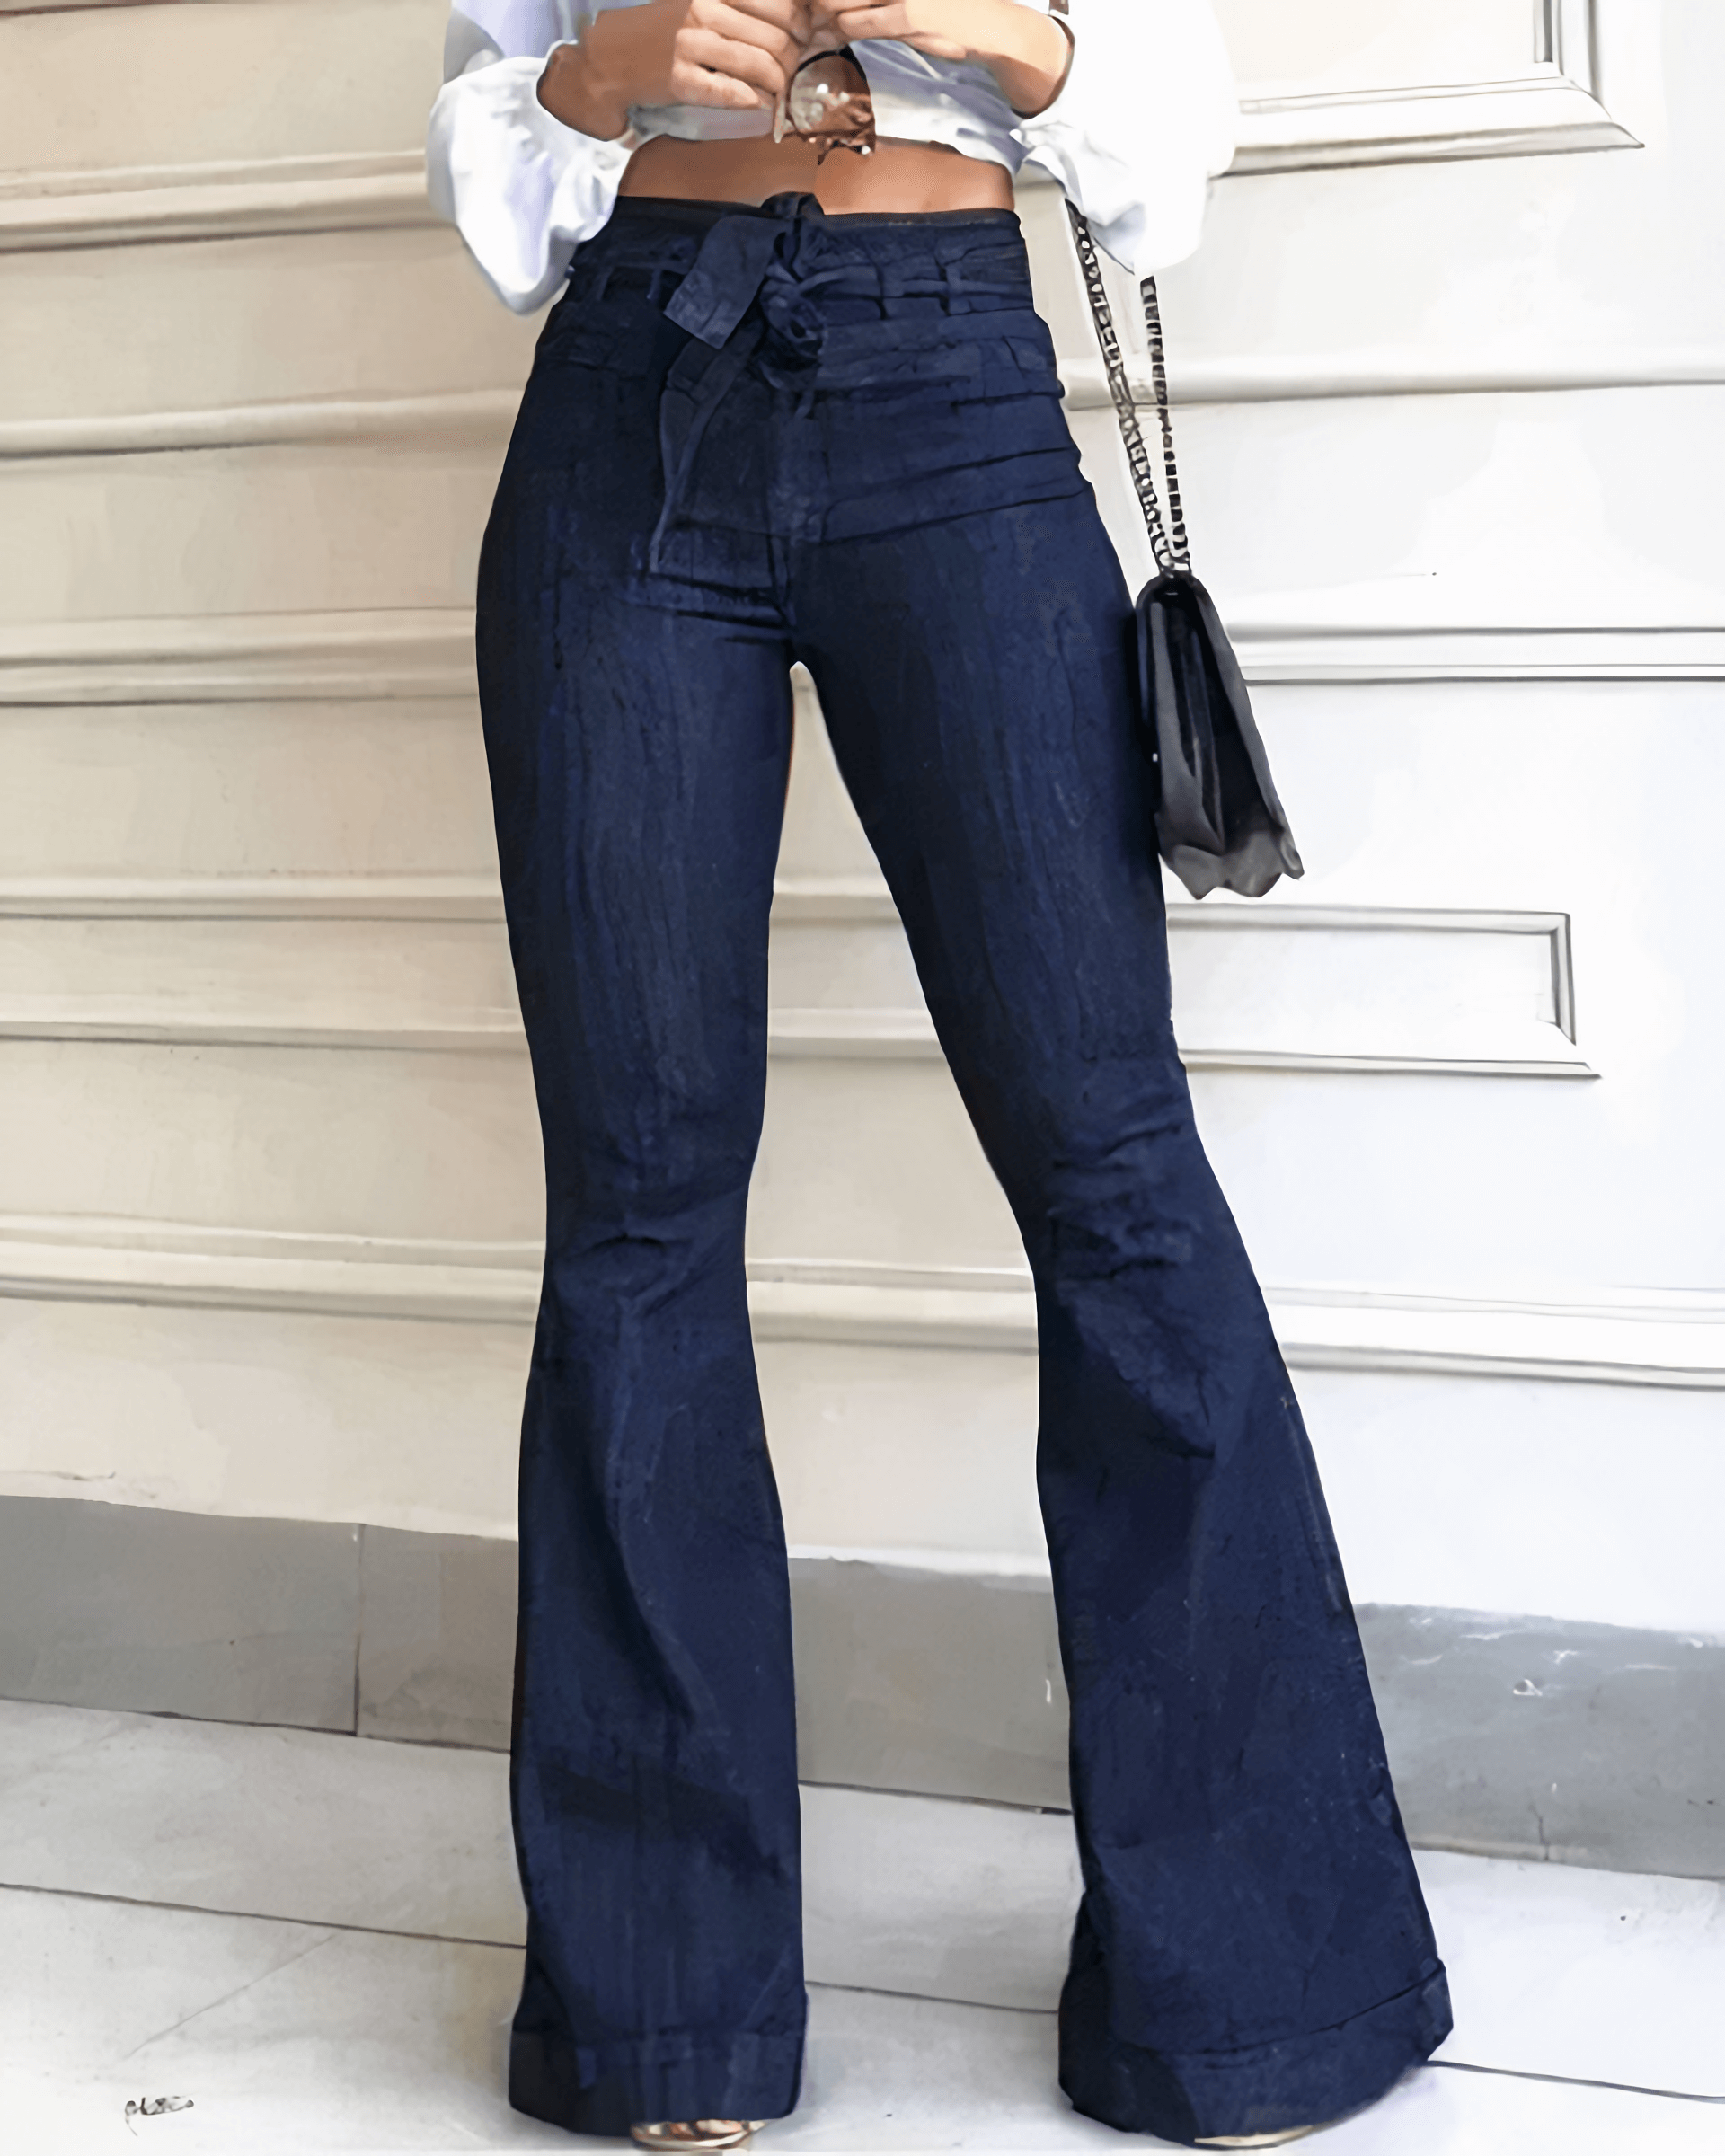 90s Vintage Tie Waist Butt Lifting Flare Jeans gallery 1